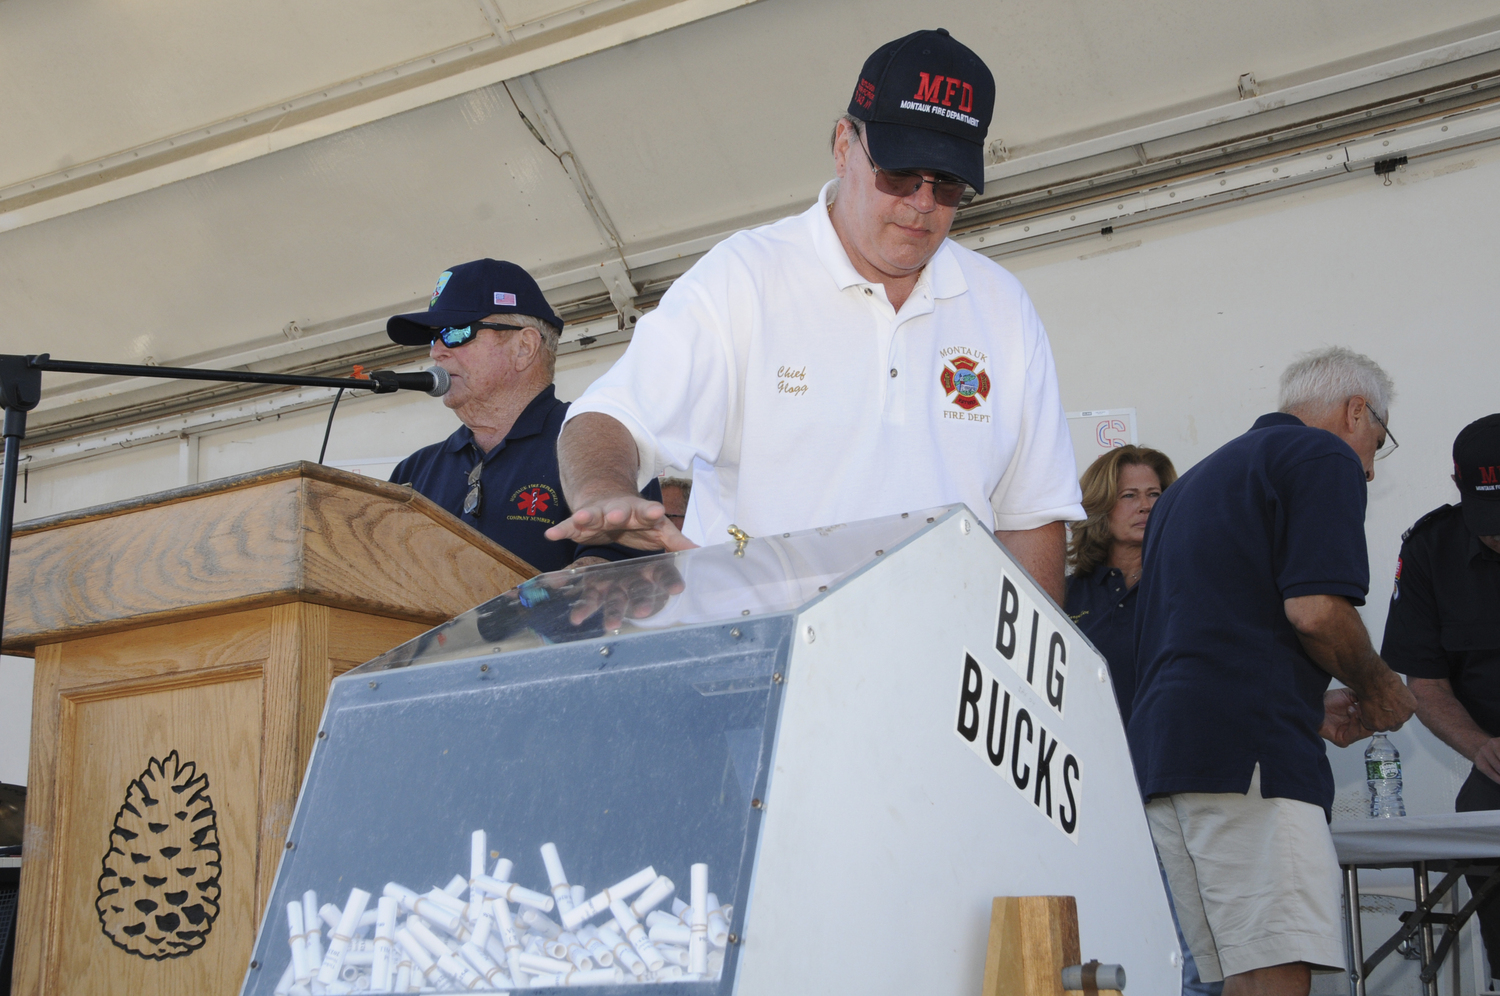 Montauk Fire Department Treasurer Dick White and Chief Ken Glogg at the 40th annual  Montauk Fire Department Big Bucks Bonanza on Sunday at the firehouse. Music was provided by the local Nancy Atlas Project and special guest musician Joe Delia. Proceeds from the Bonanza go to a Scholarship Fund for Montauk youths. Each scholarship is in memory of a Montauk fireman who worked at Montauk School:  Custodian Don Truesdale; Athletic Director Hank Zebrowski; Crossing Guard Skip Cannon; and Superintendent  Bob Fisher. To date, the Big Bucks Bonanza prize drawing has given away Scholarship prize money totaling almost $5,000,000.   RICHARD LEWIN